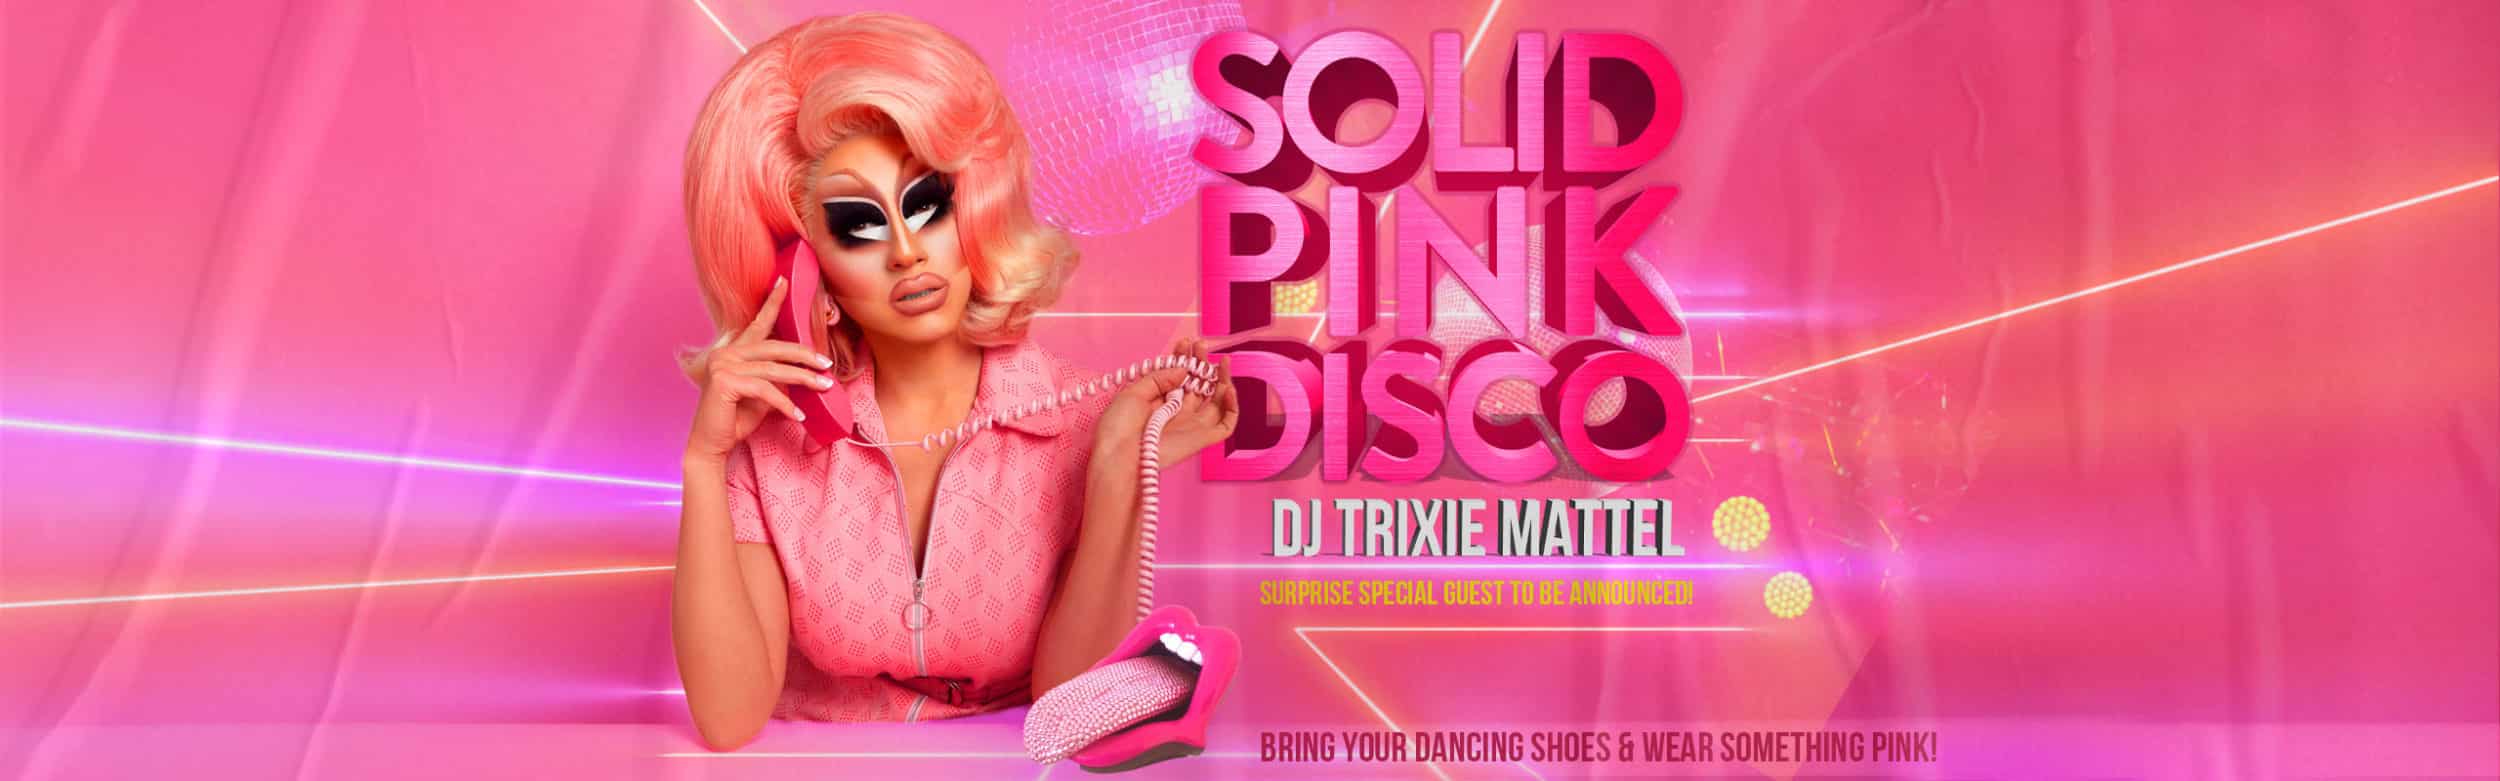 DJ Trixie Mattel - Solid Pink Disco - The Rooftop at Pier 17